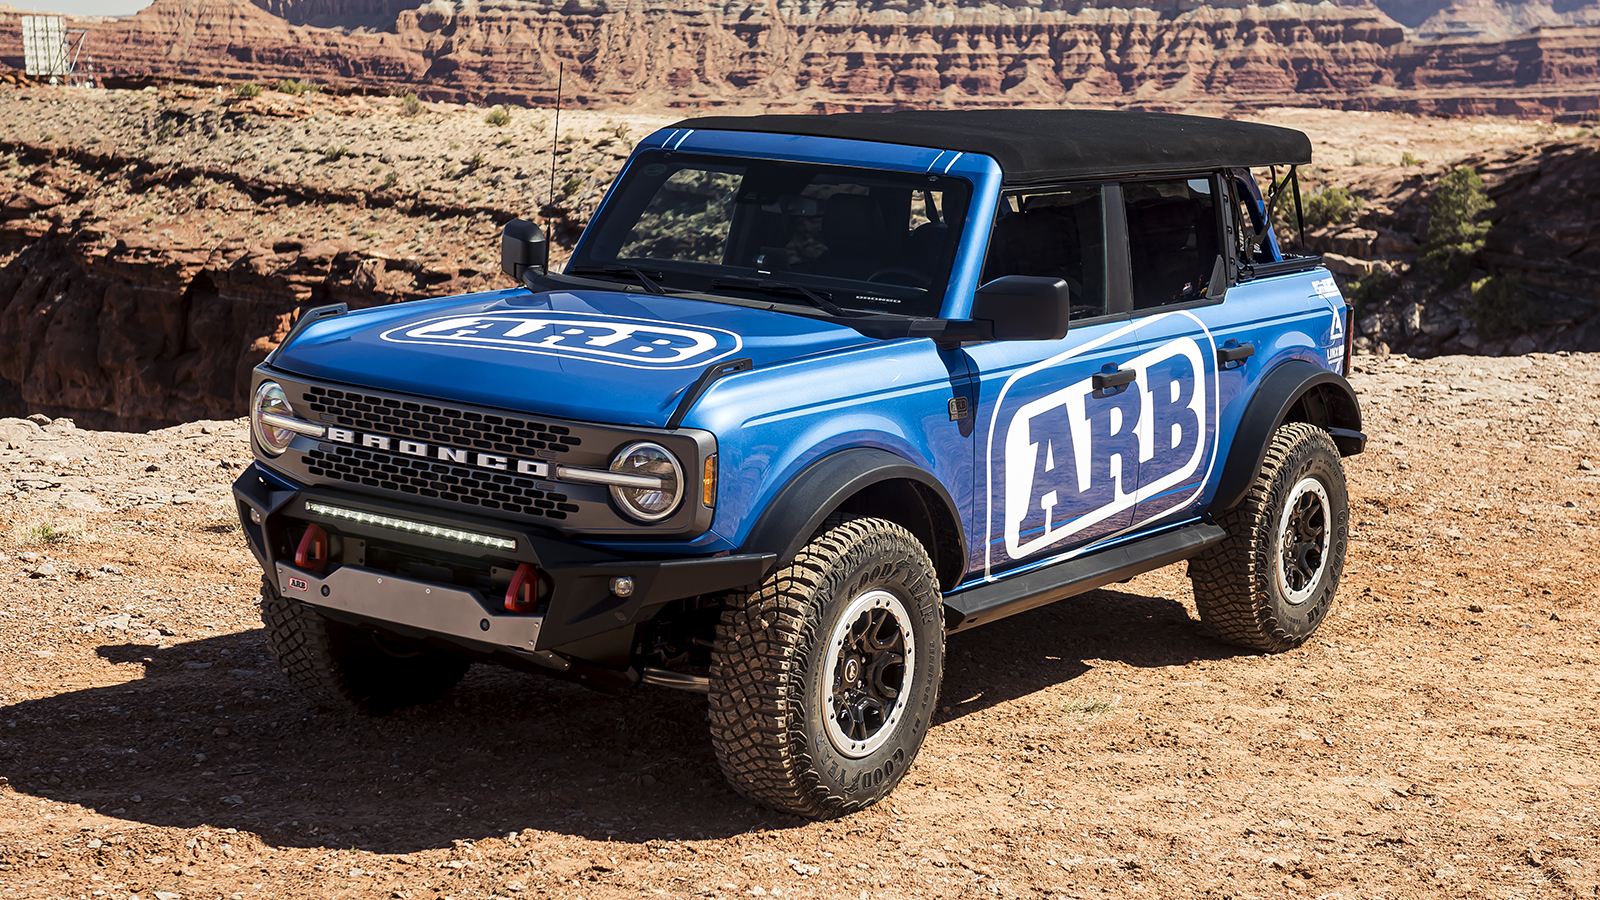 Ford Bronco joins the Easter Safari fun with new custom builds | Autoblog